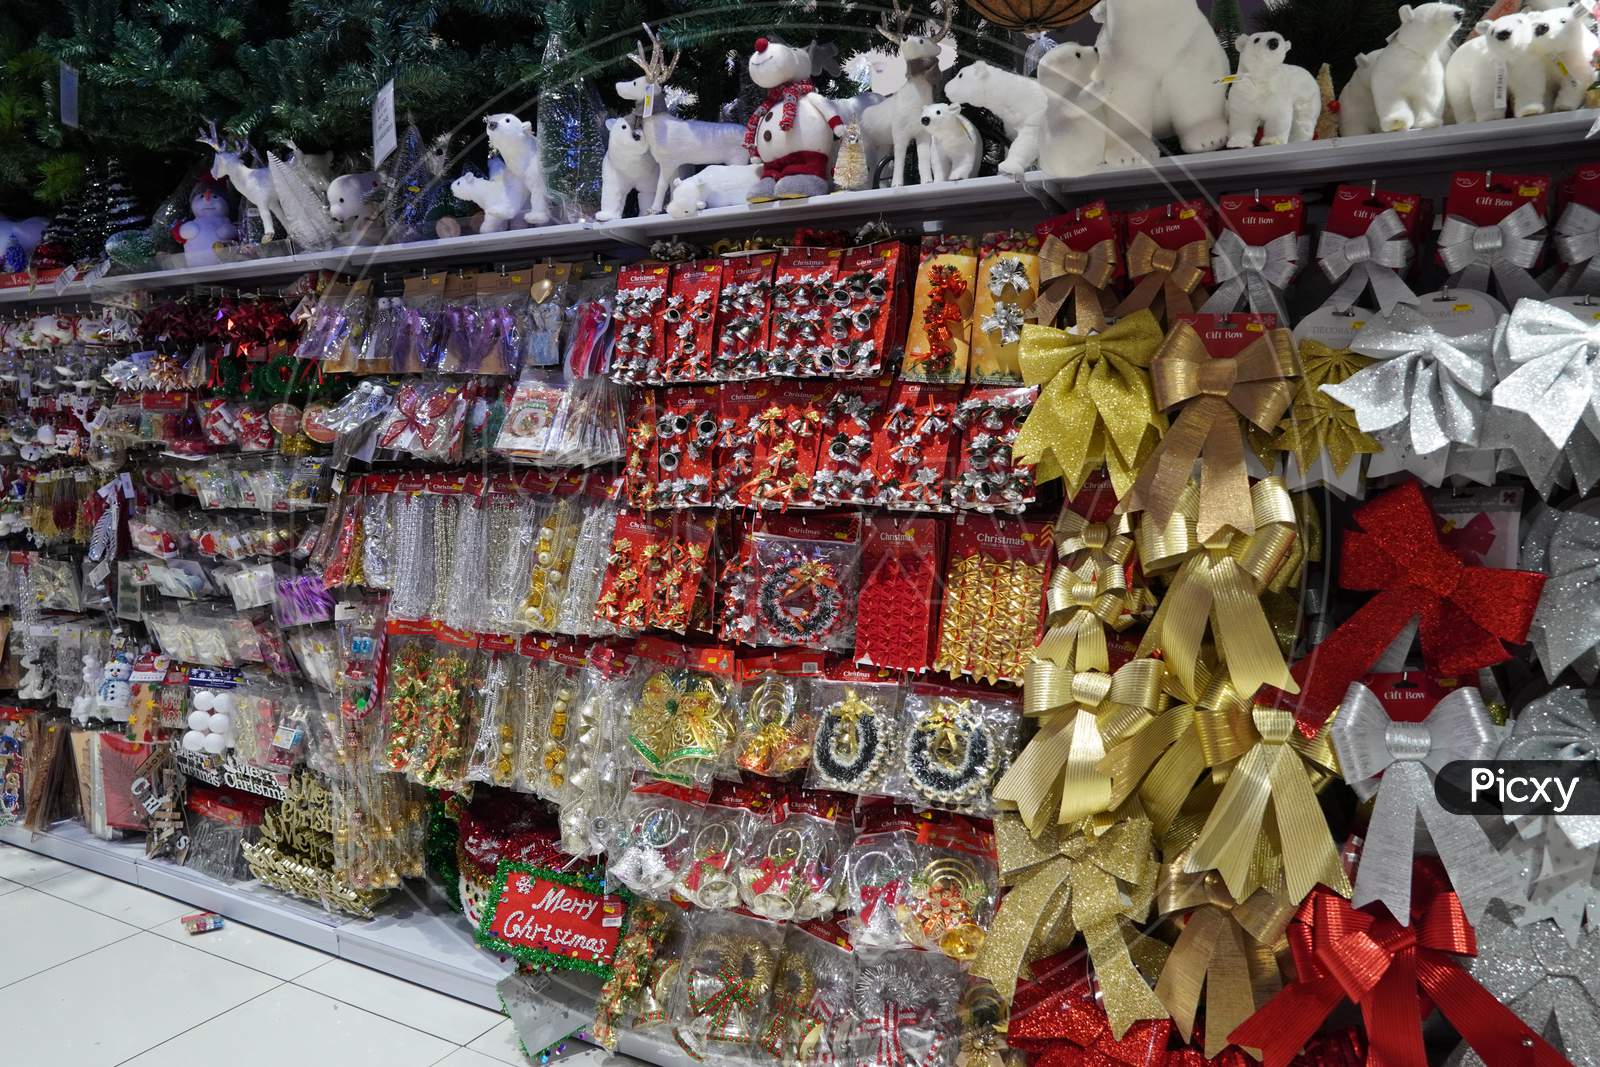 Christmas Market. Christmas Decoration Shelves Filled With Tree Ornaments, Shiny Baubles, Gift Stockings, Antler Headbands, Novelty Decorations, Signs & Festive Animals - Dubai Uae December 2019